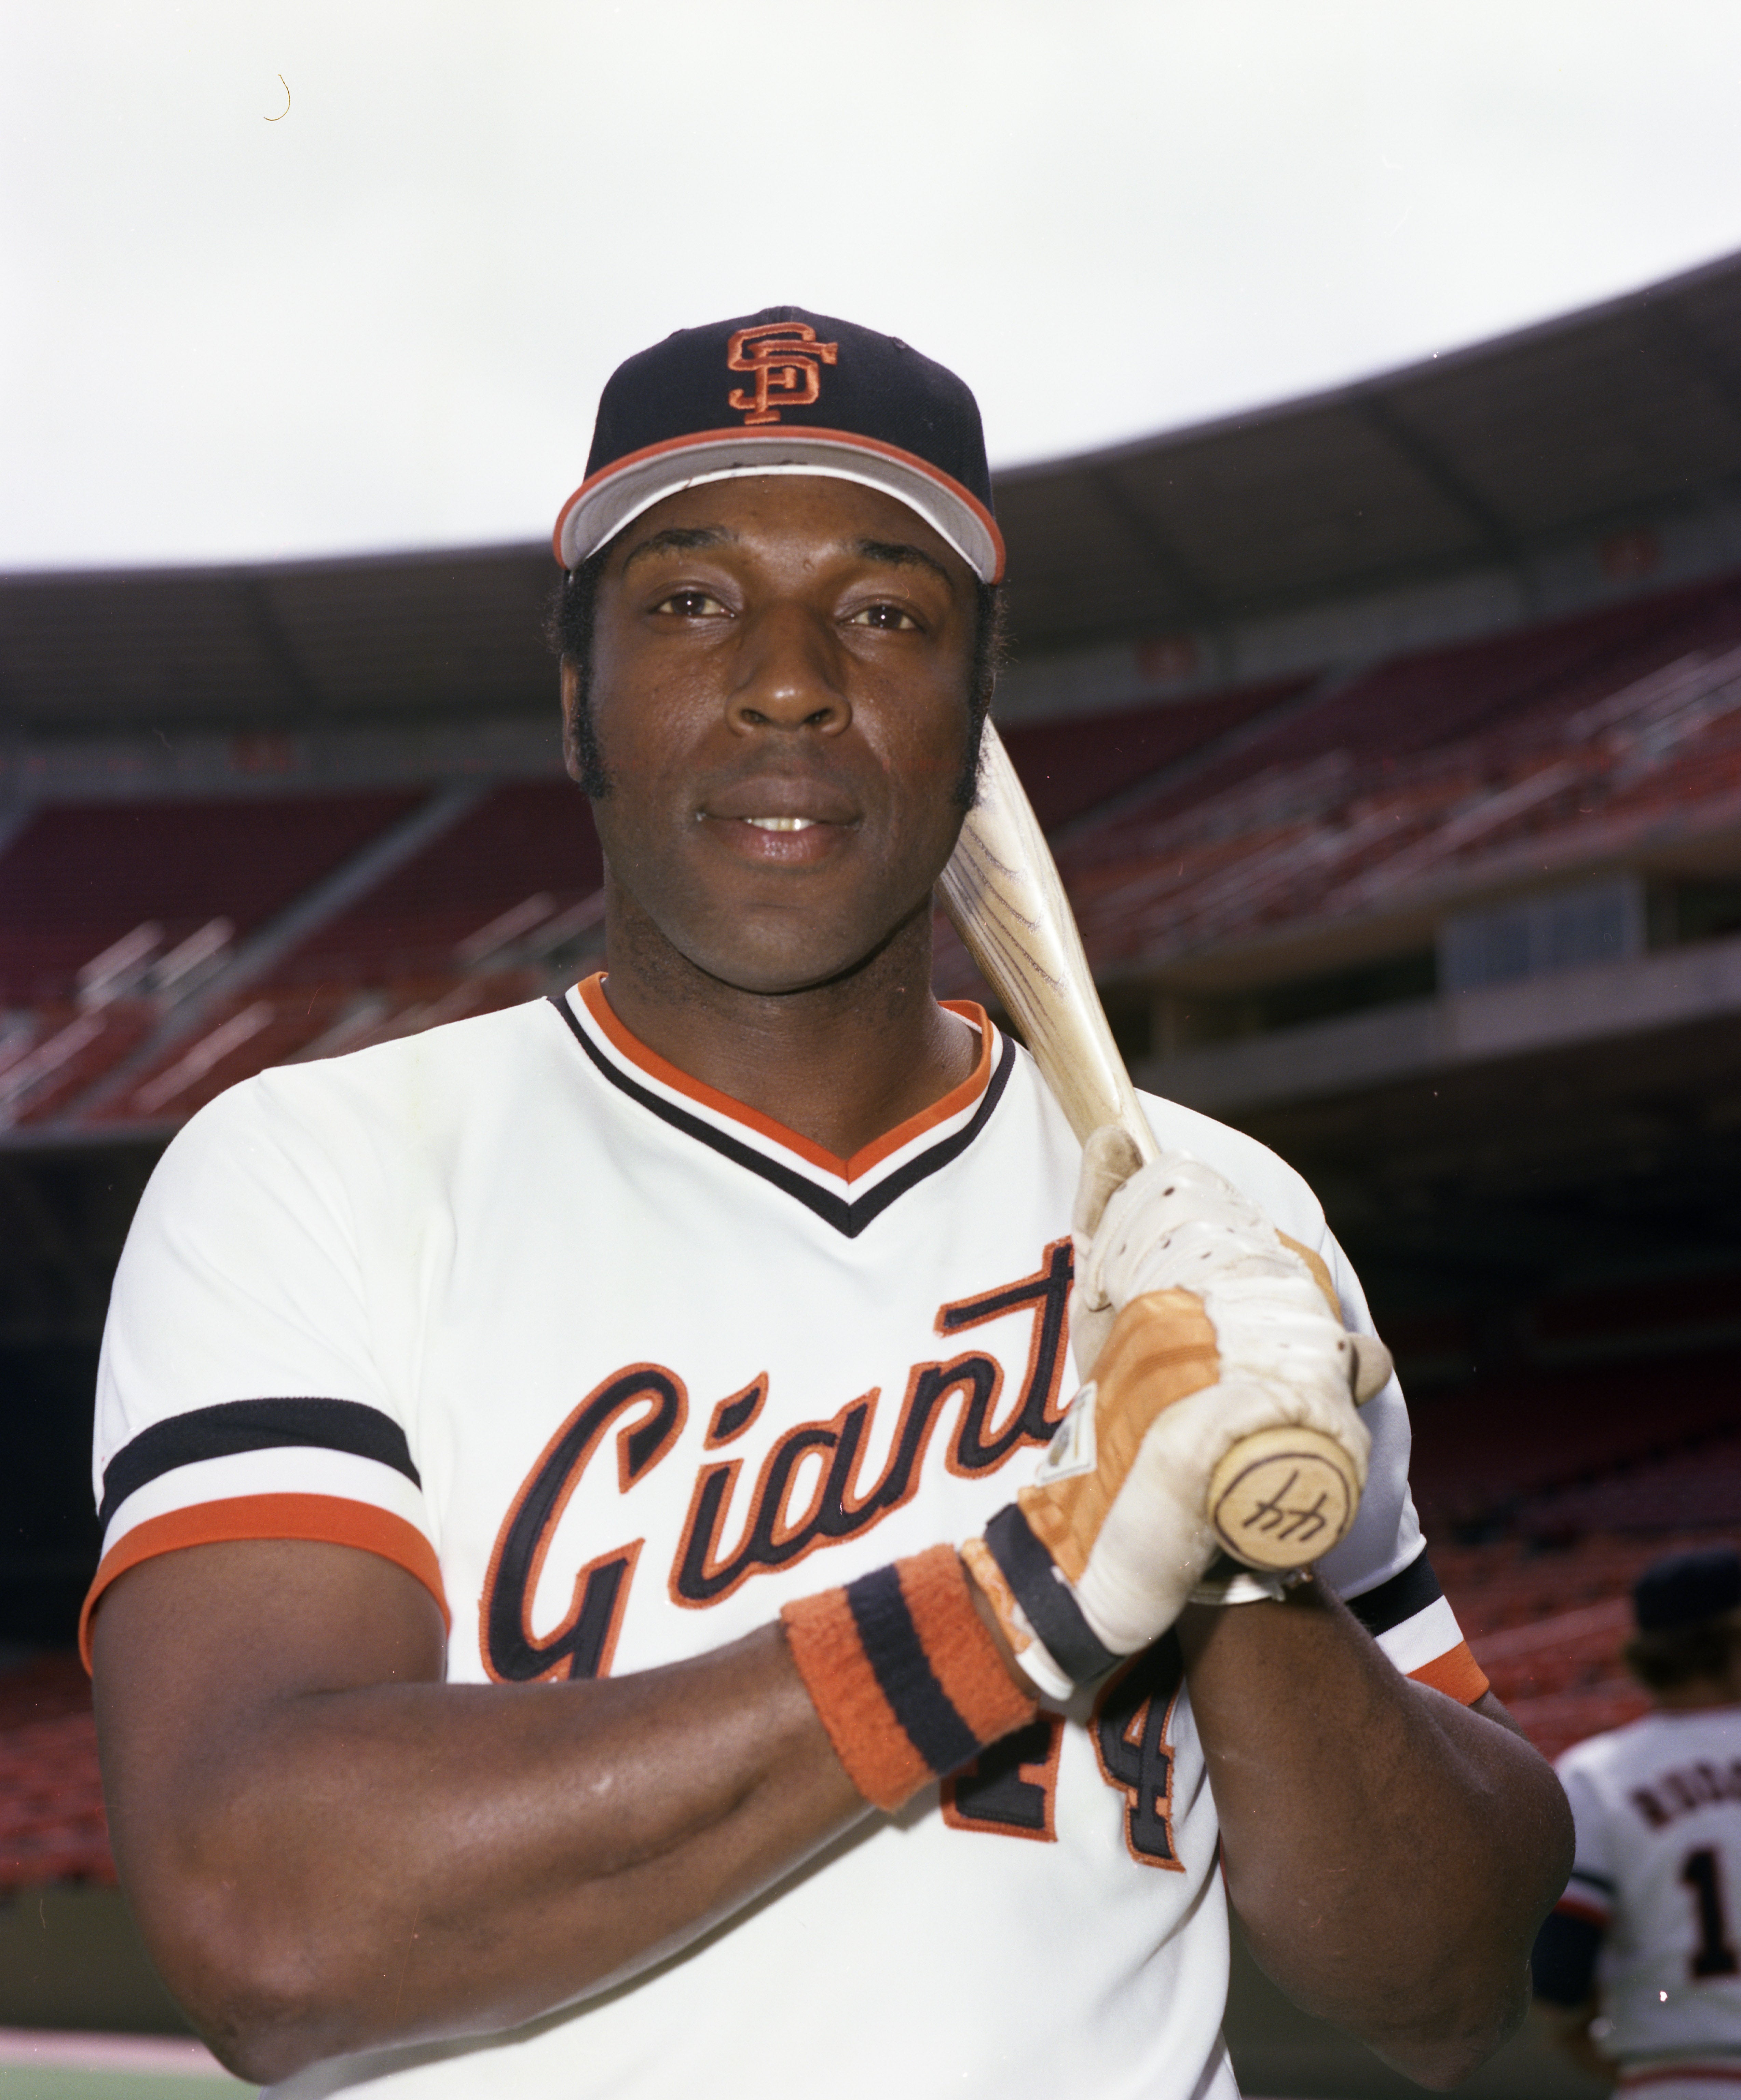 Q&A with Hall of Famer Willie McCovey